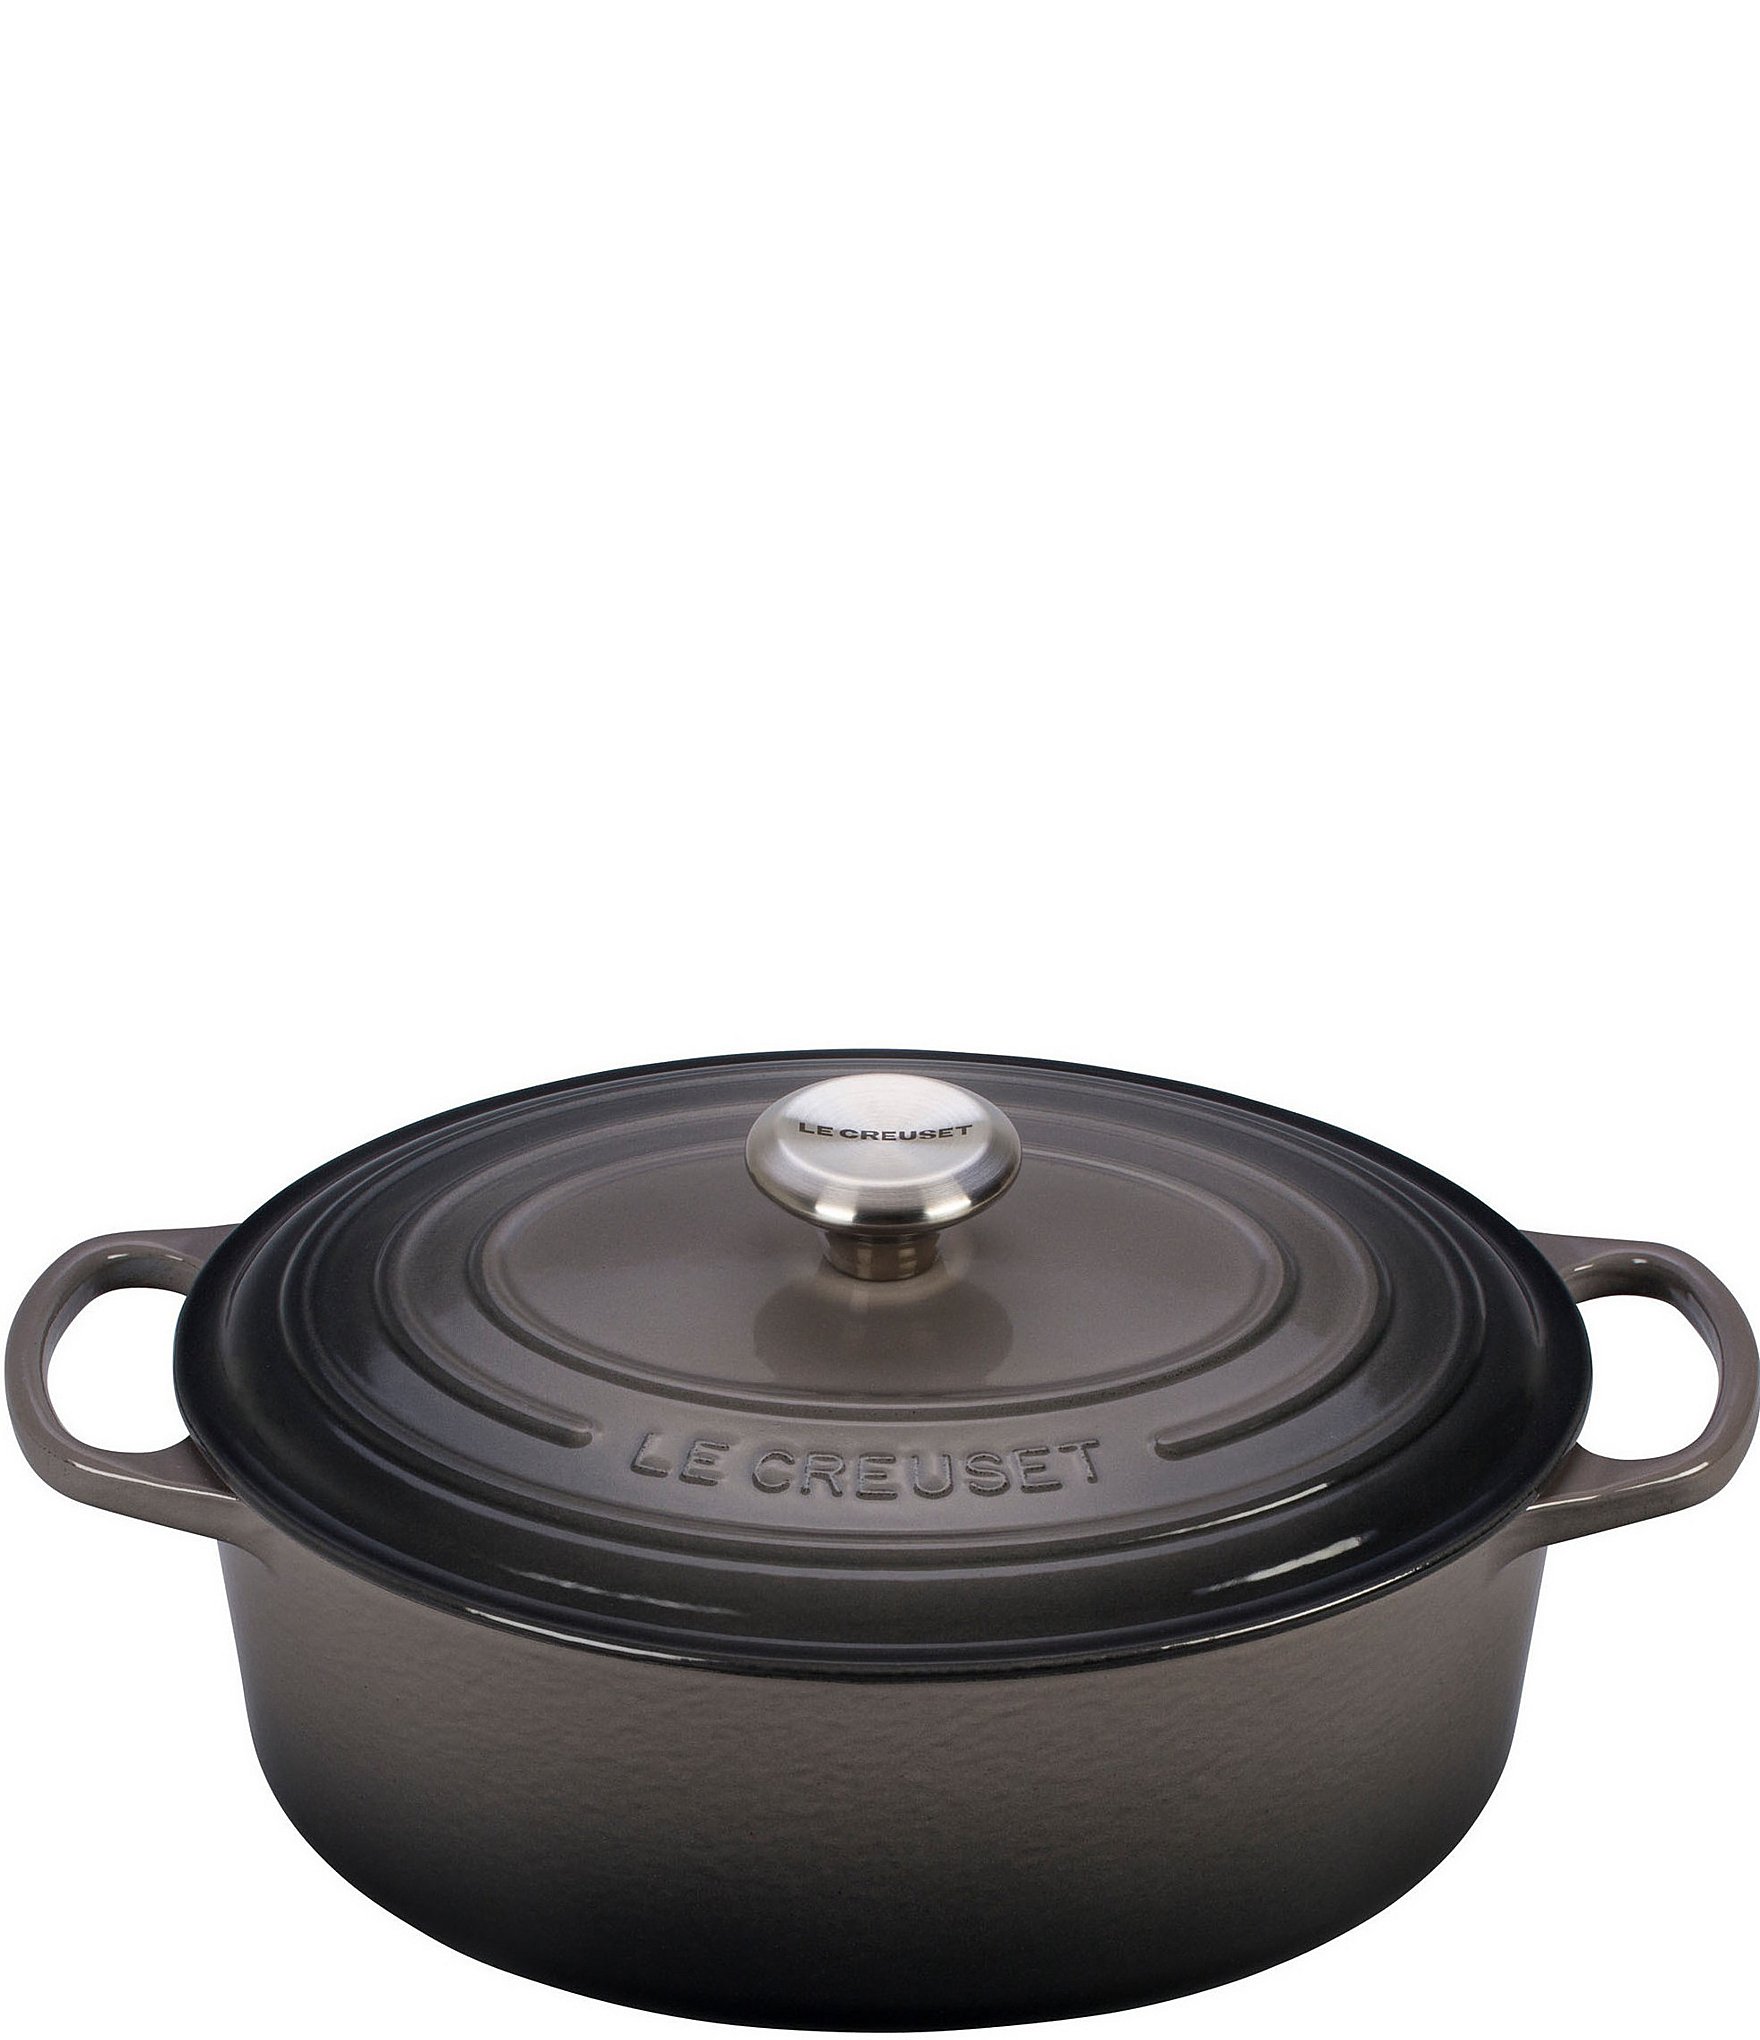 Le Creuset 5-Quart Signature Oval Dutch Oven with Stainless Steel Knob ...